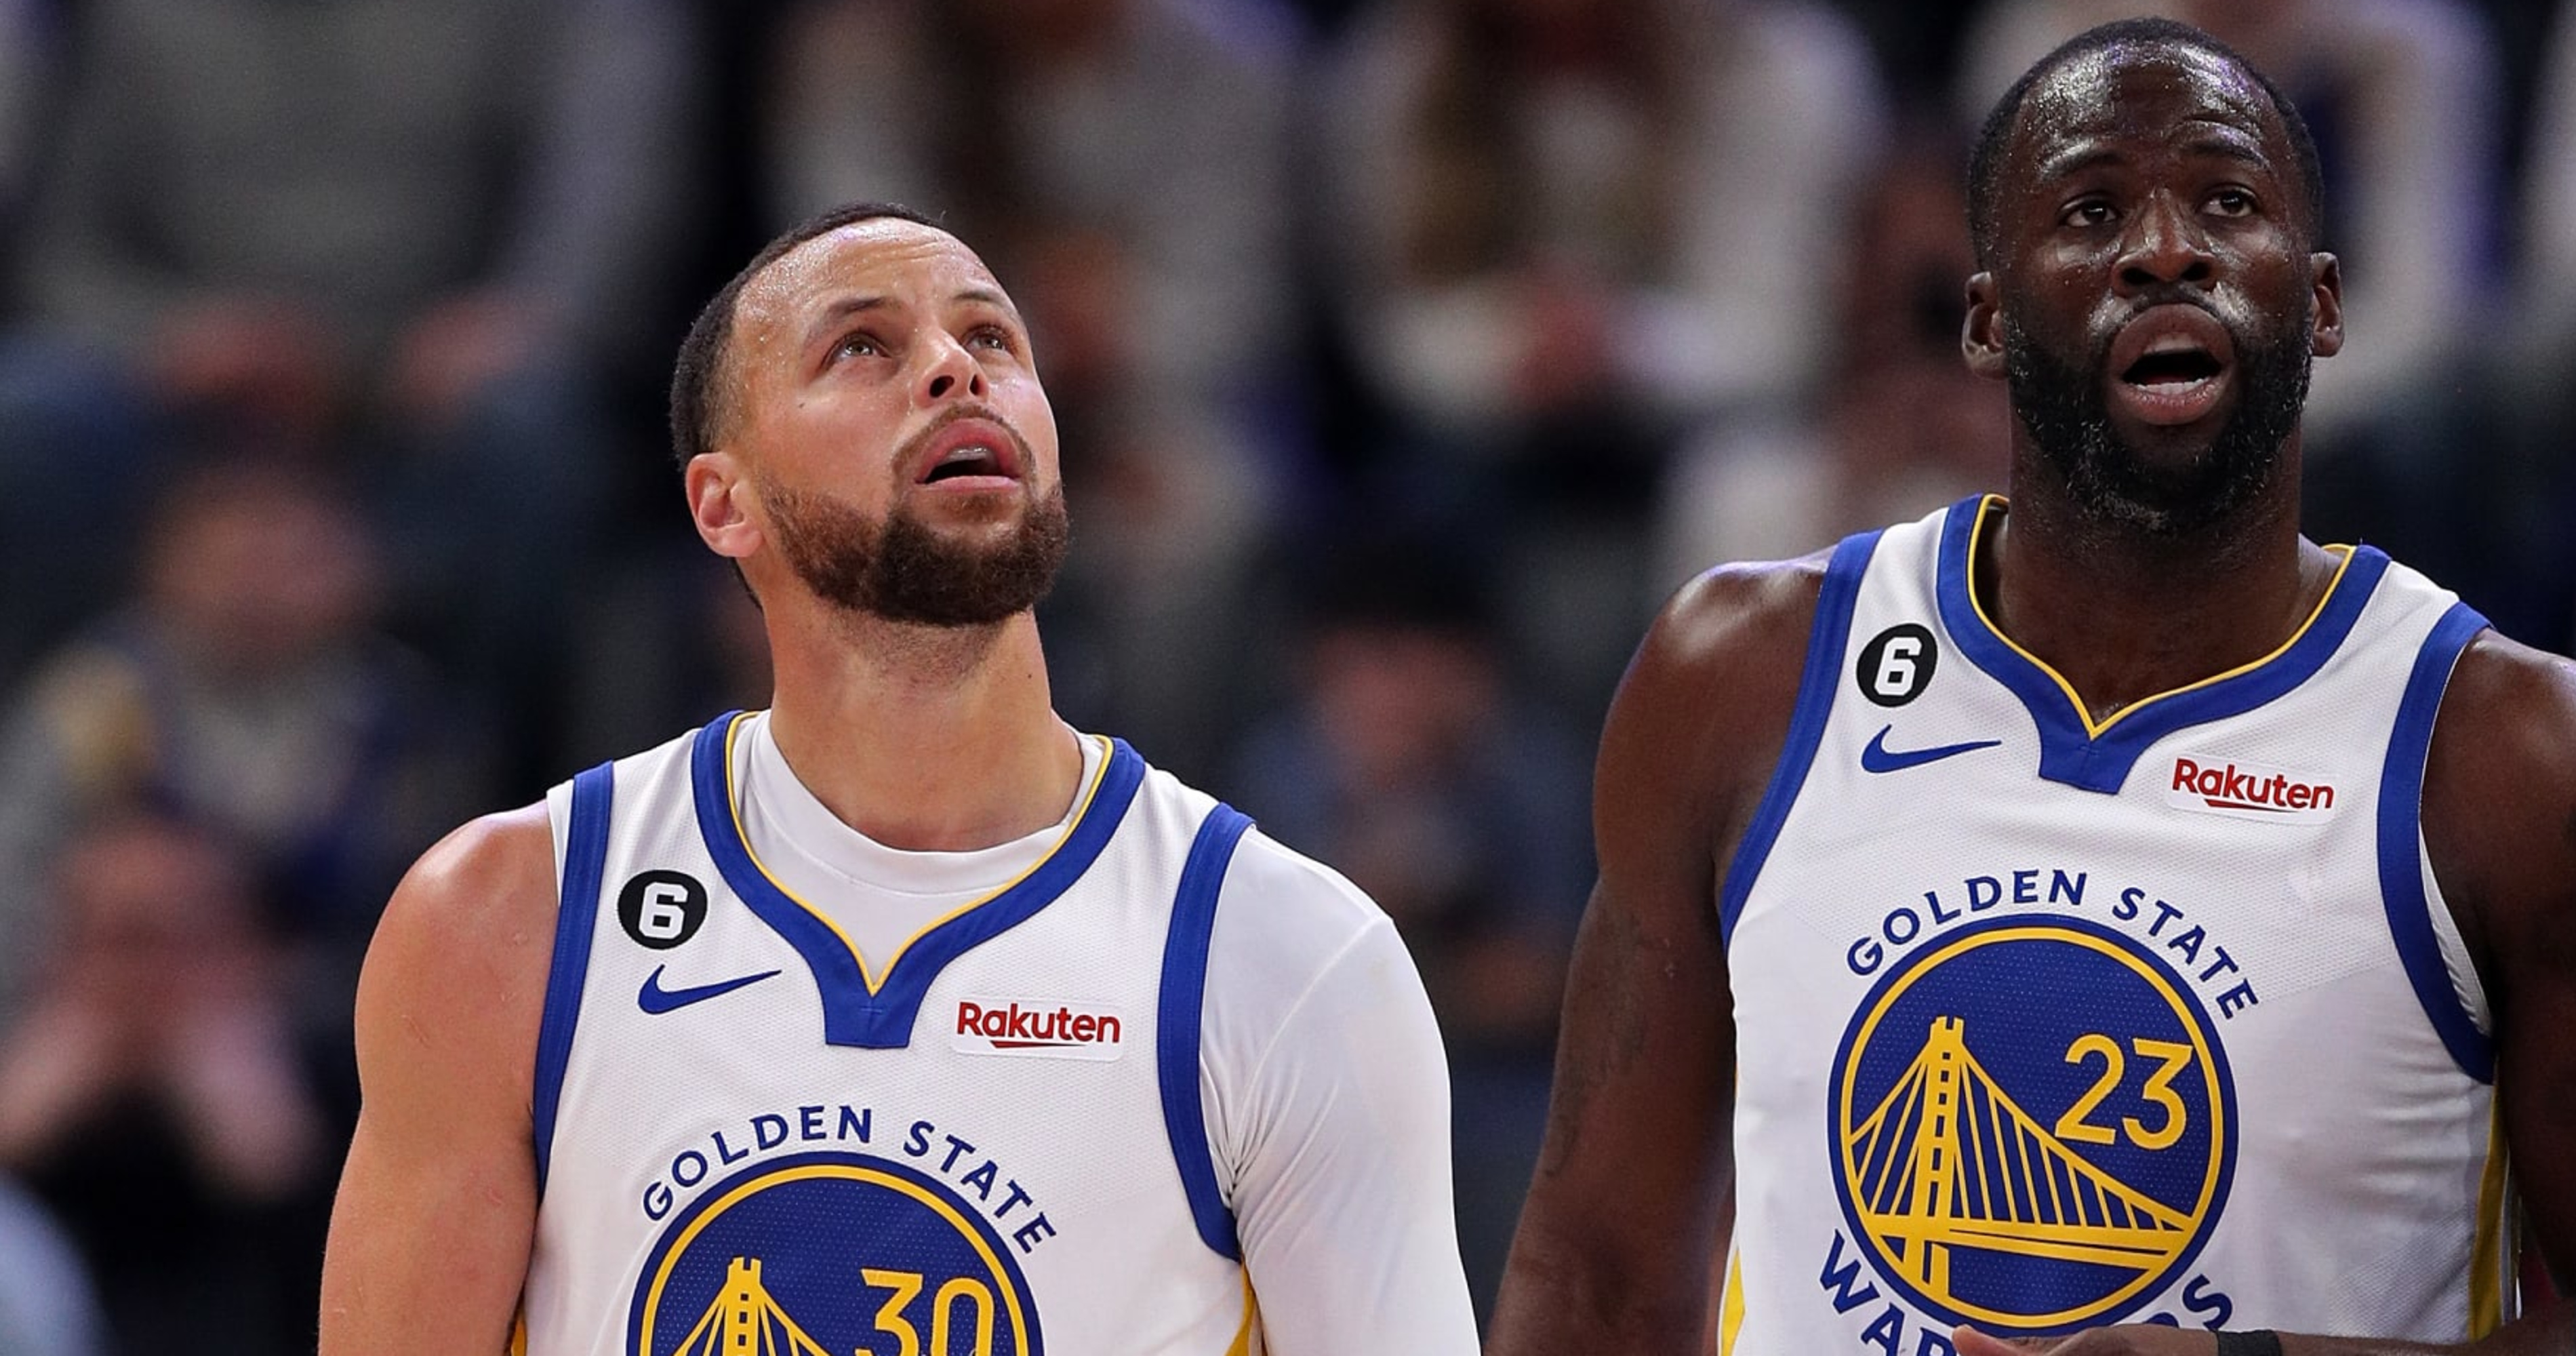 Steph Curry, Warriors Shamed by Fans for Road Play vs. Ja Morant-Less Grizzlies